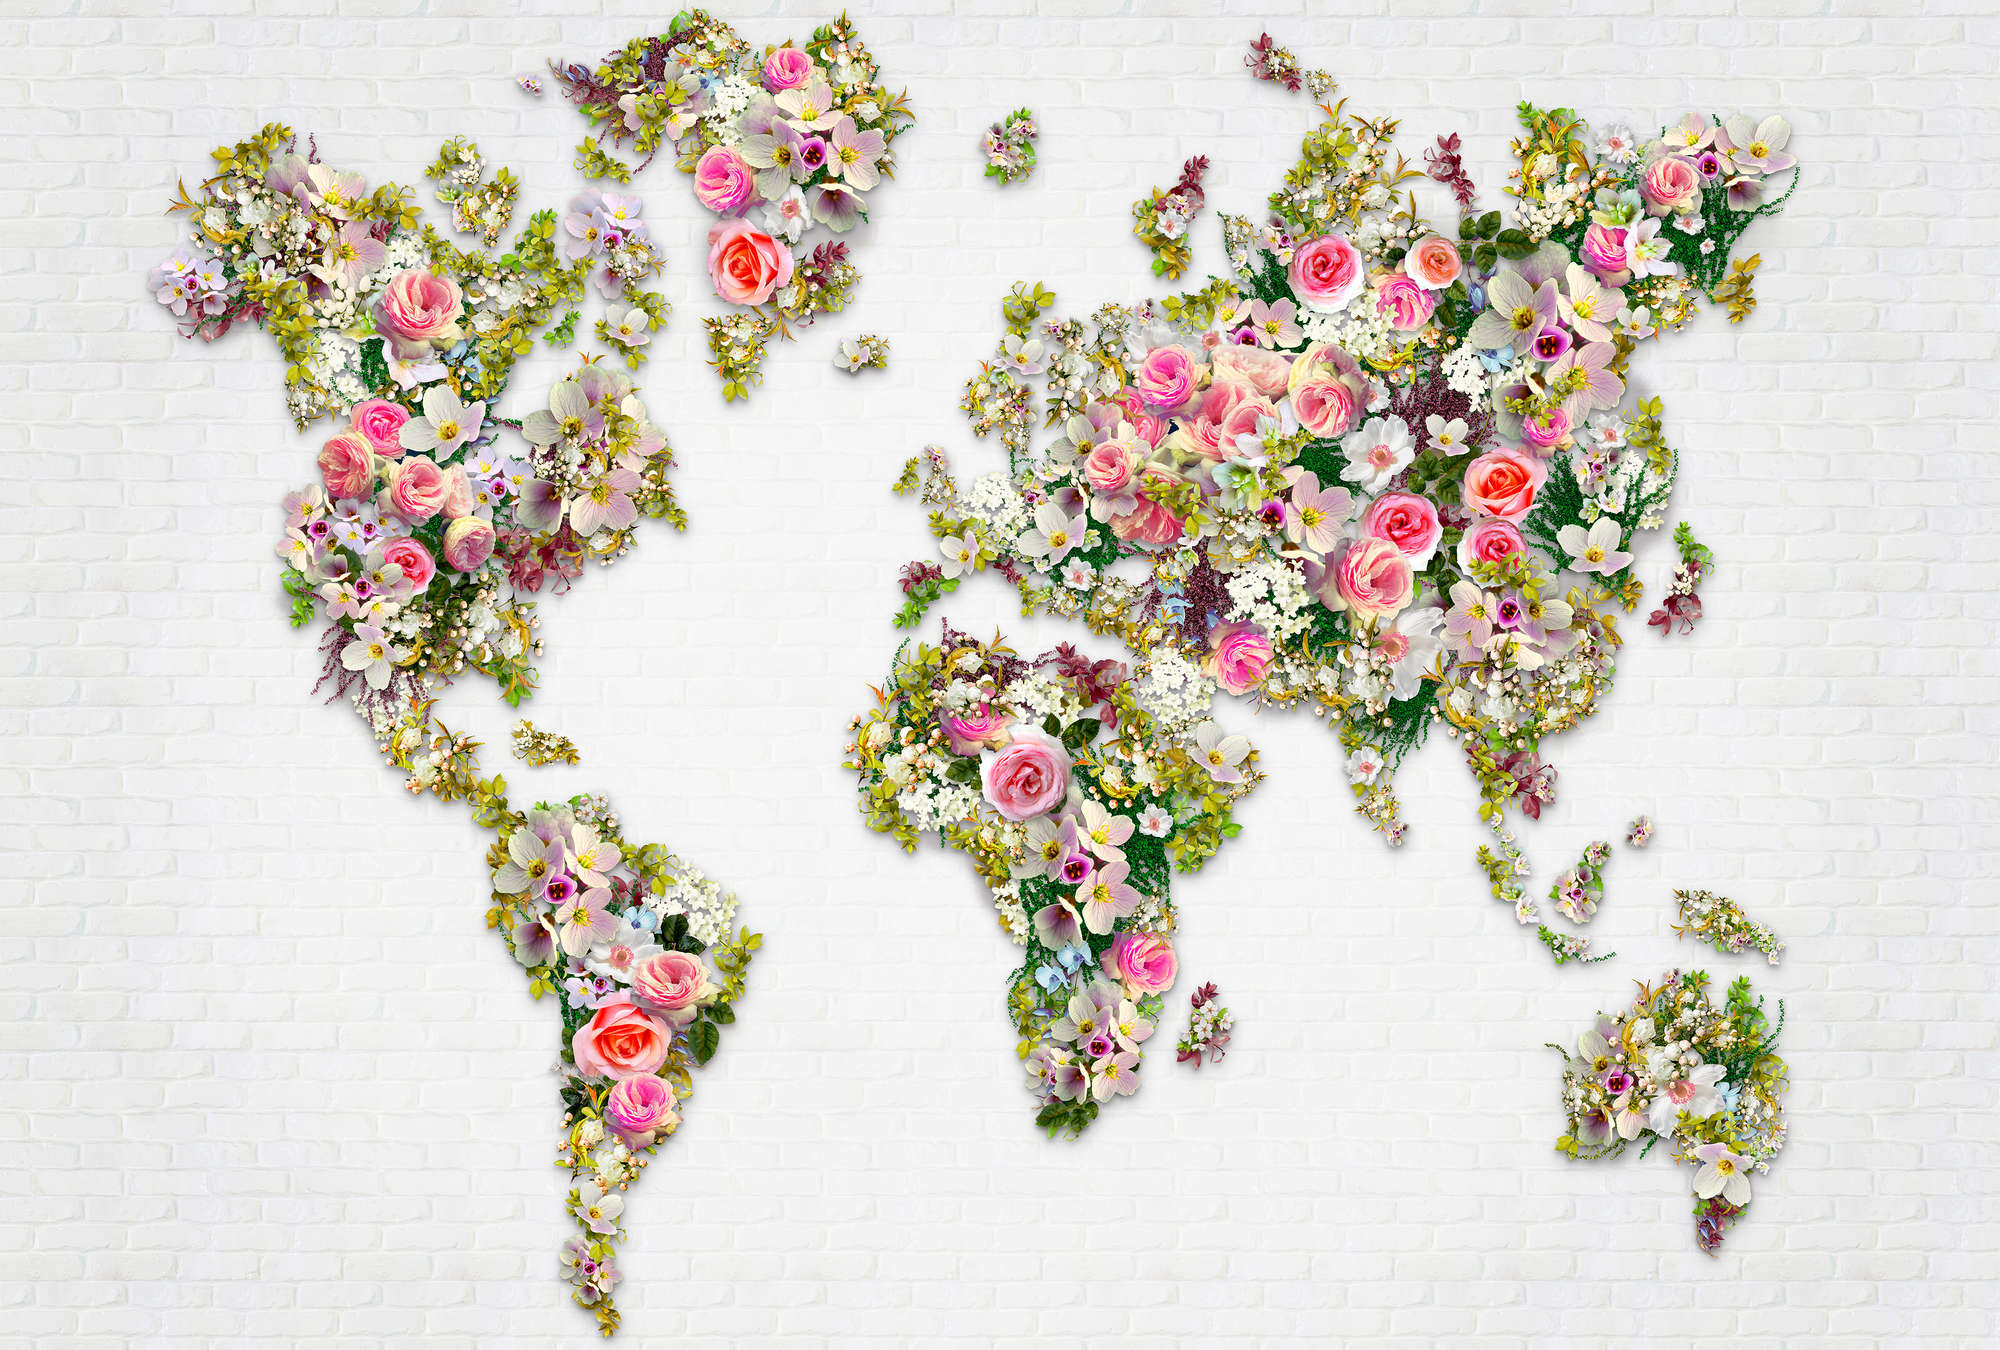             Roses & flowers mural as a world map on white wall
        